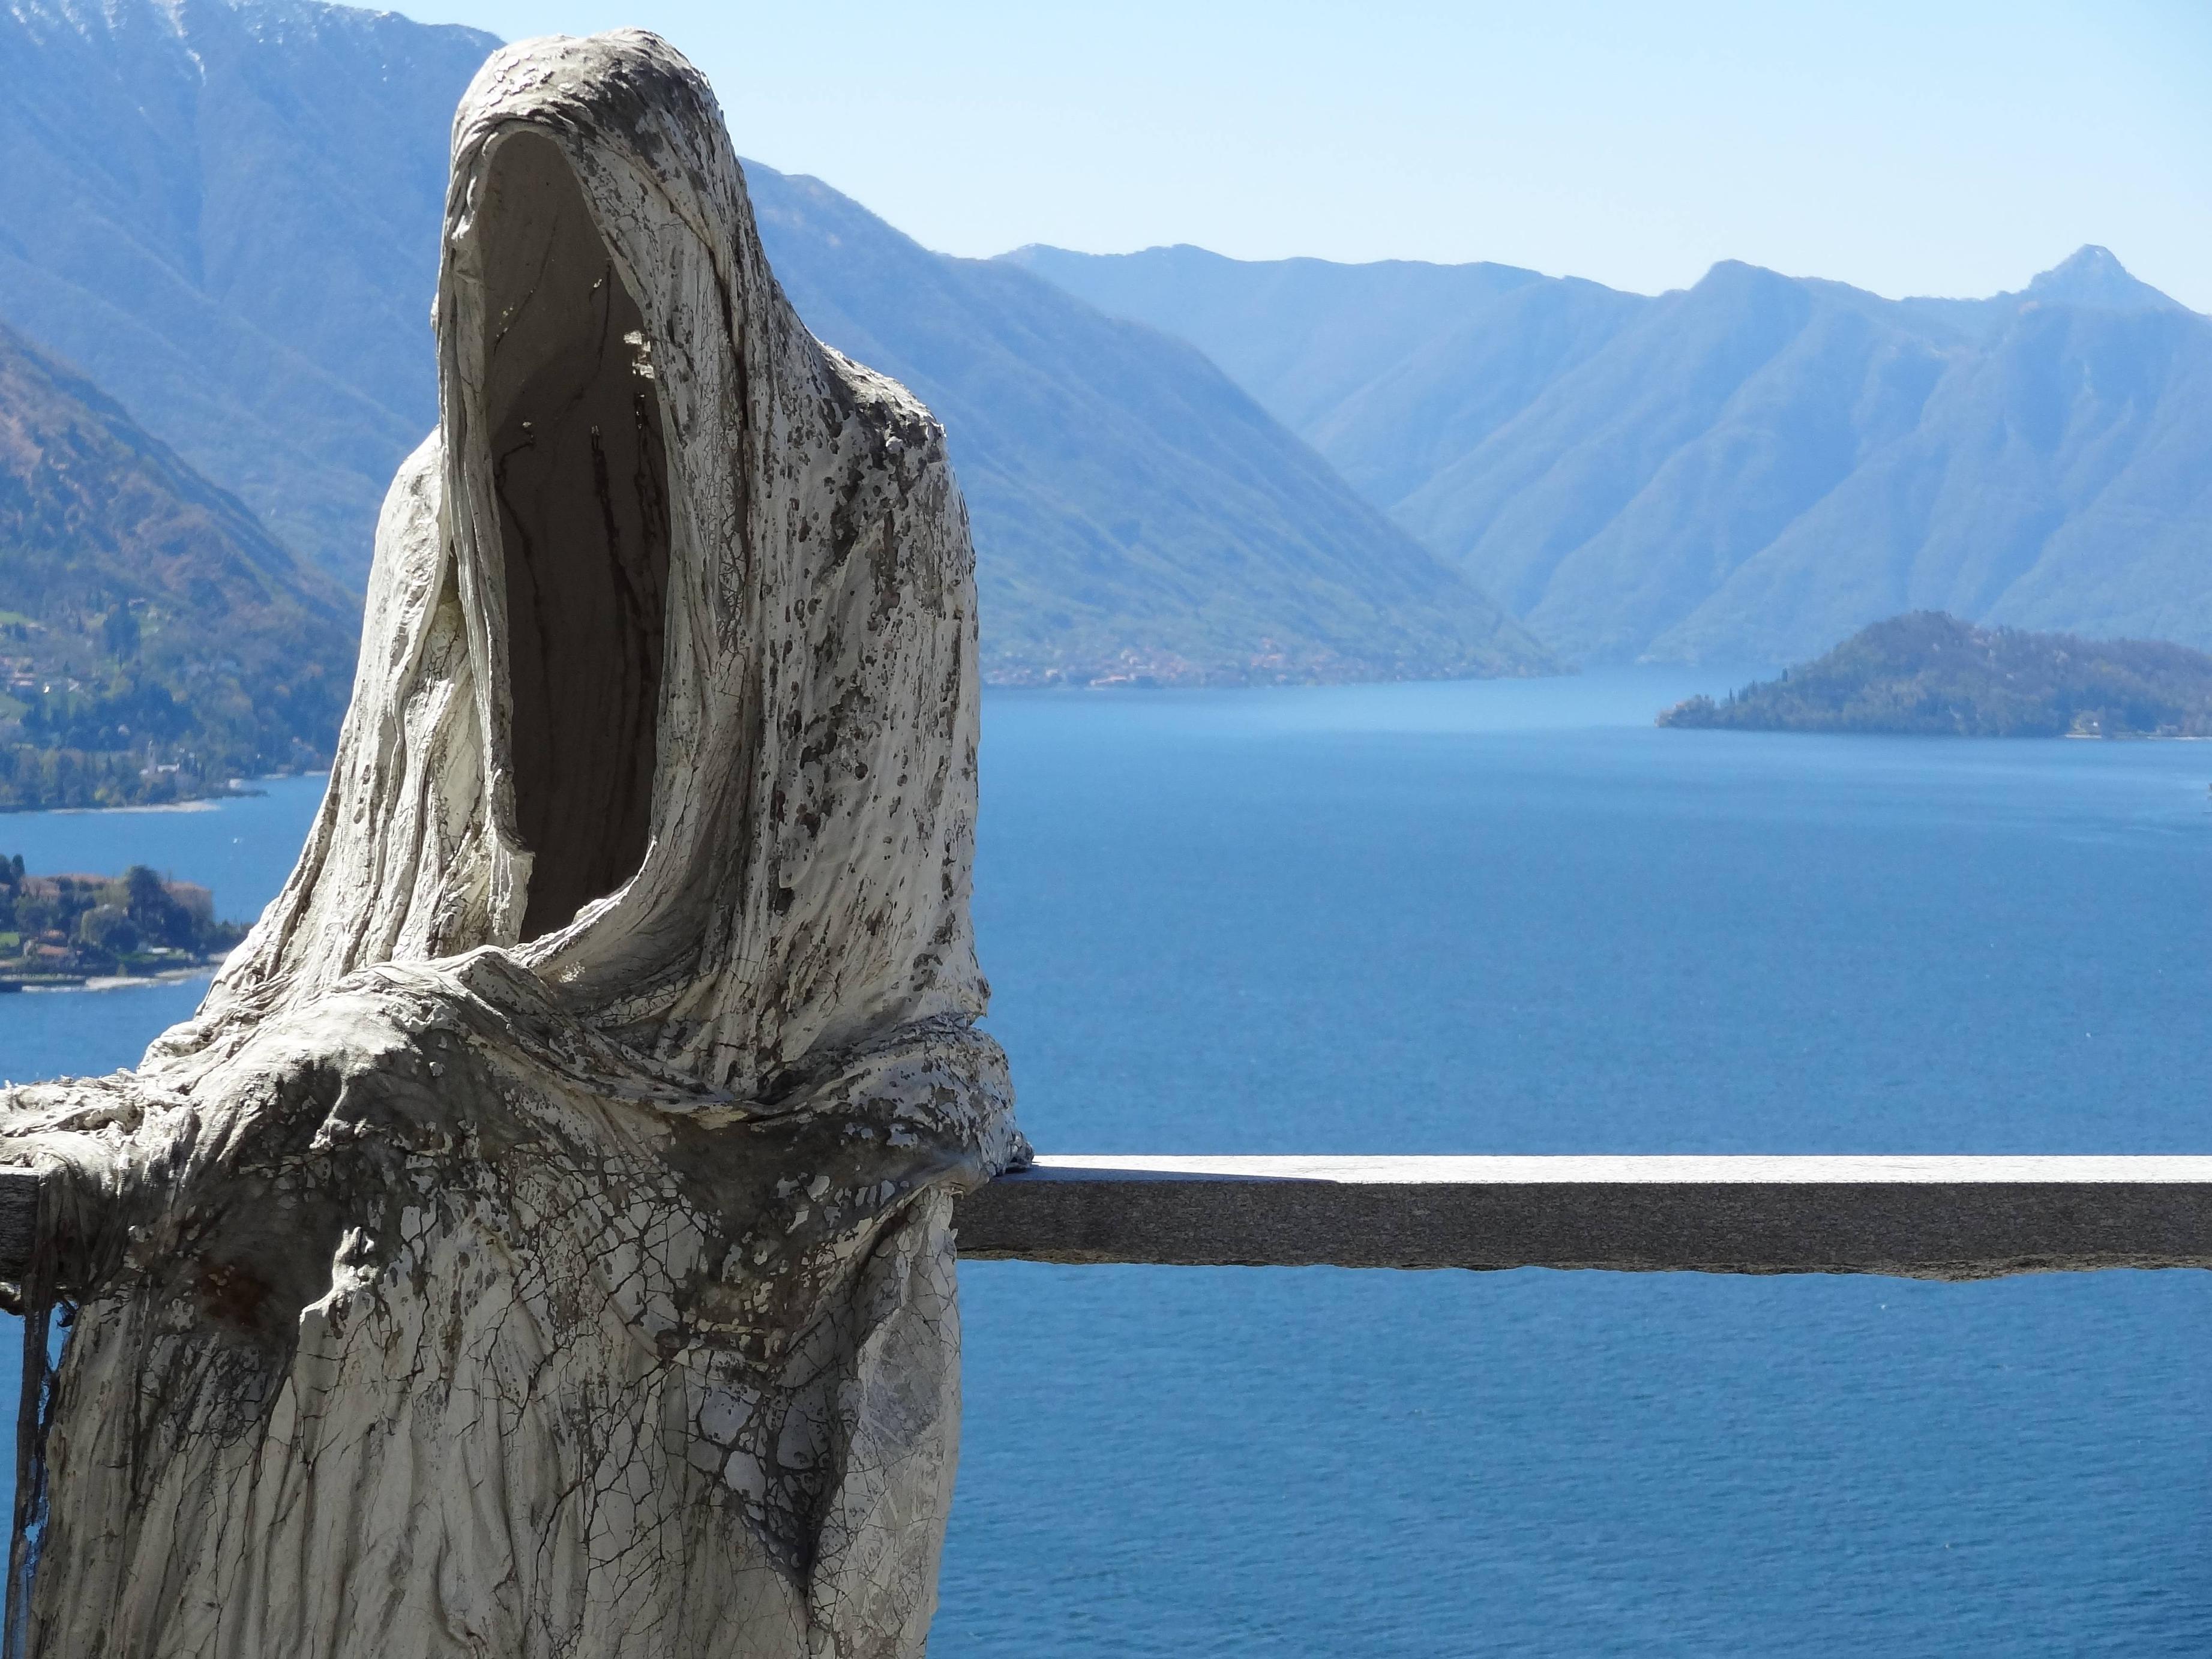 An ominous figure sitting near the cliff-side at Lake Como, Italy ...